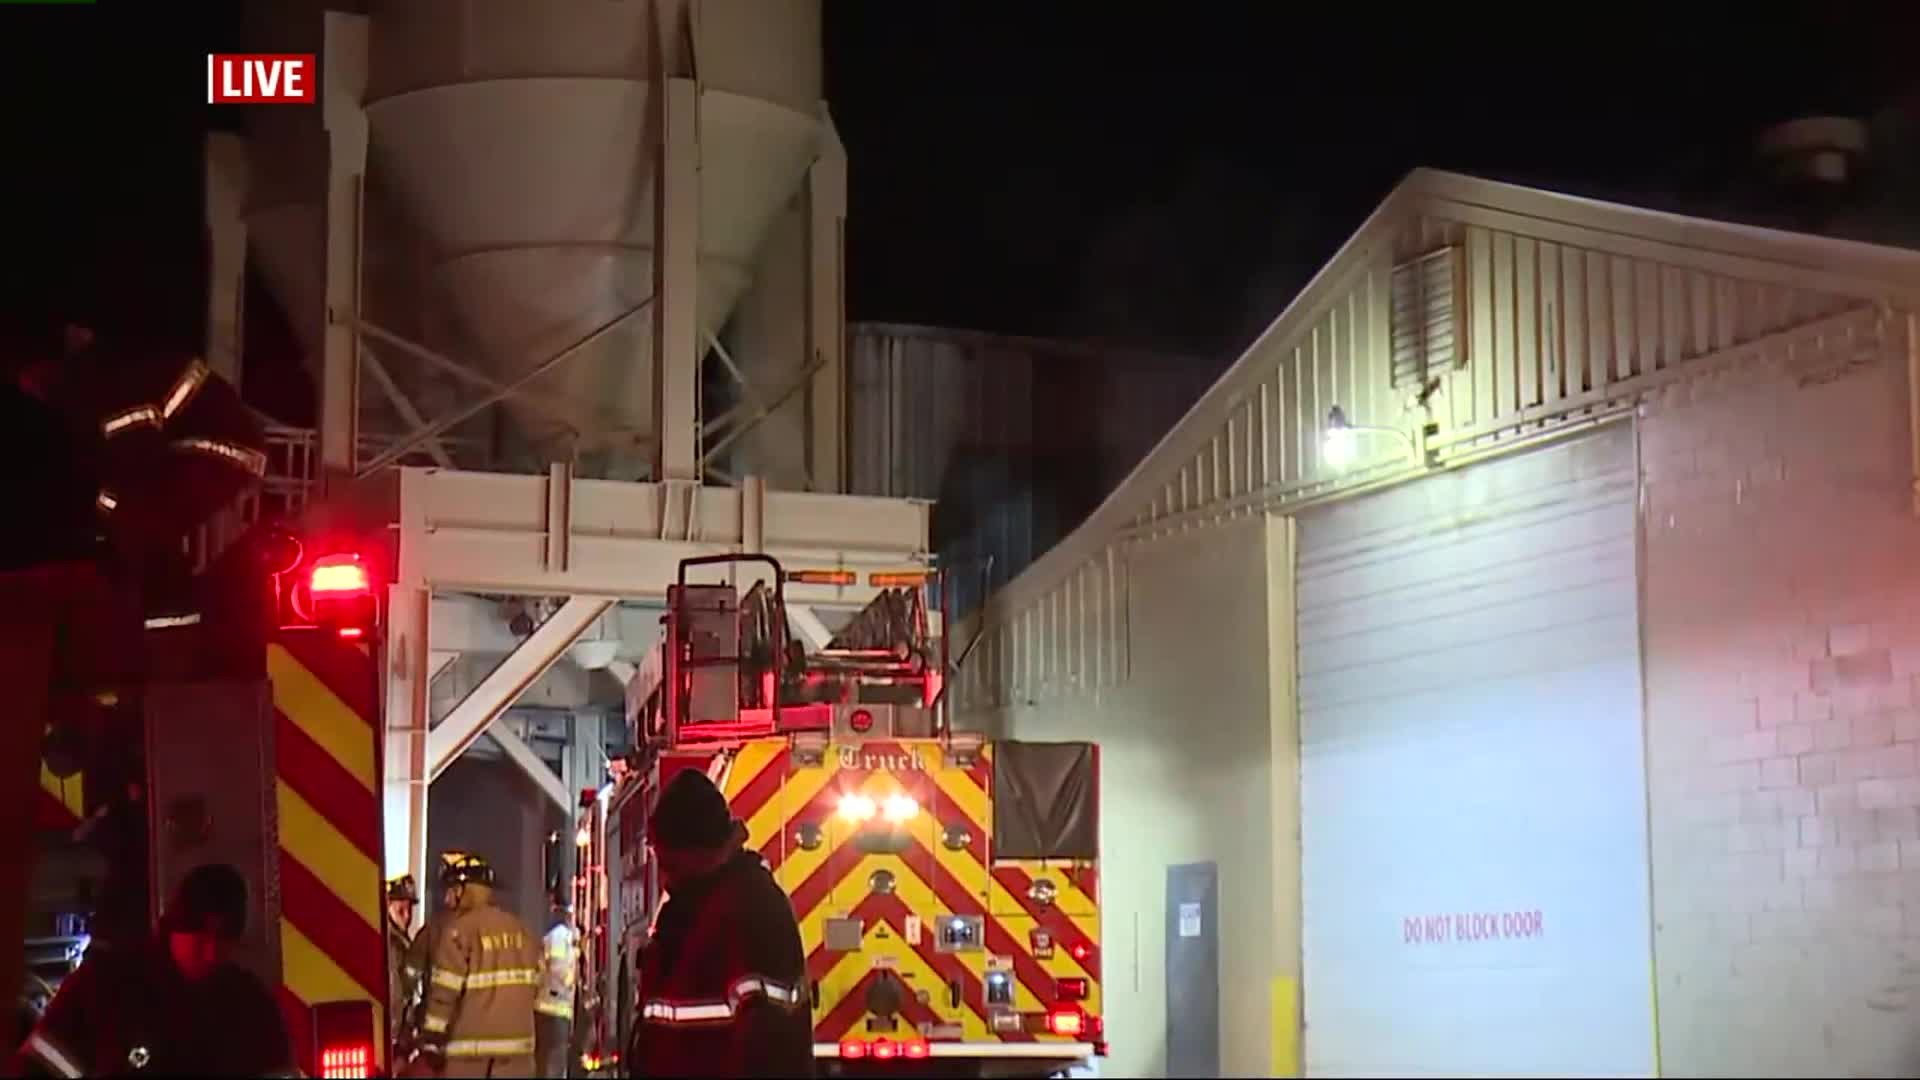 No injuries suffered after fire at H&H Dryer Plant in York City